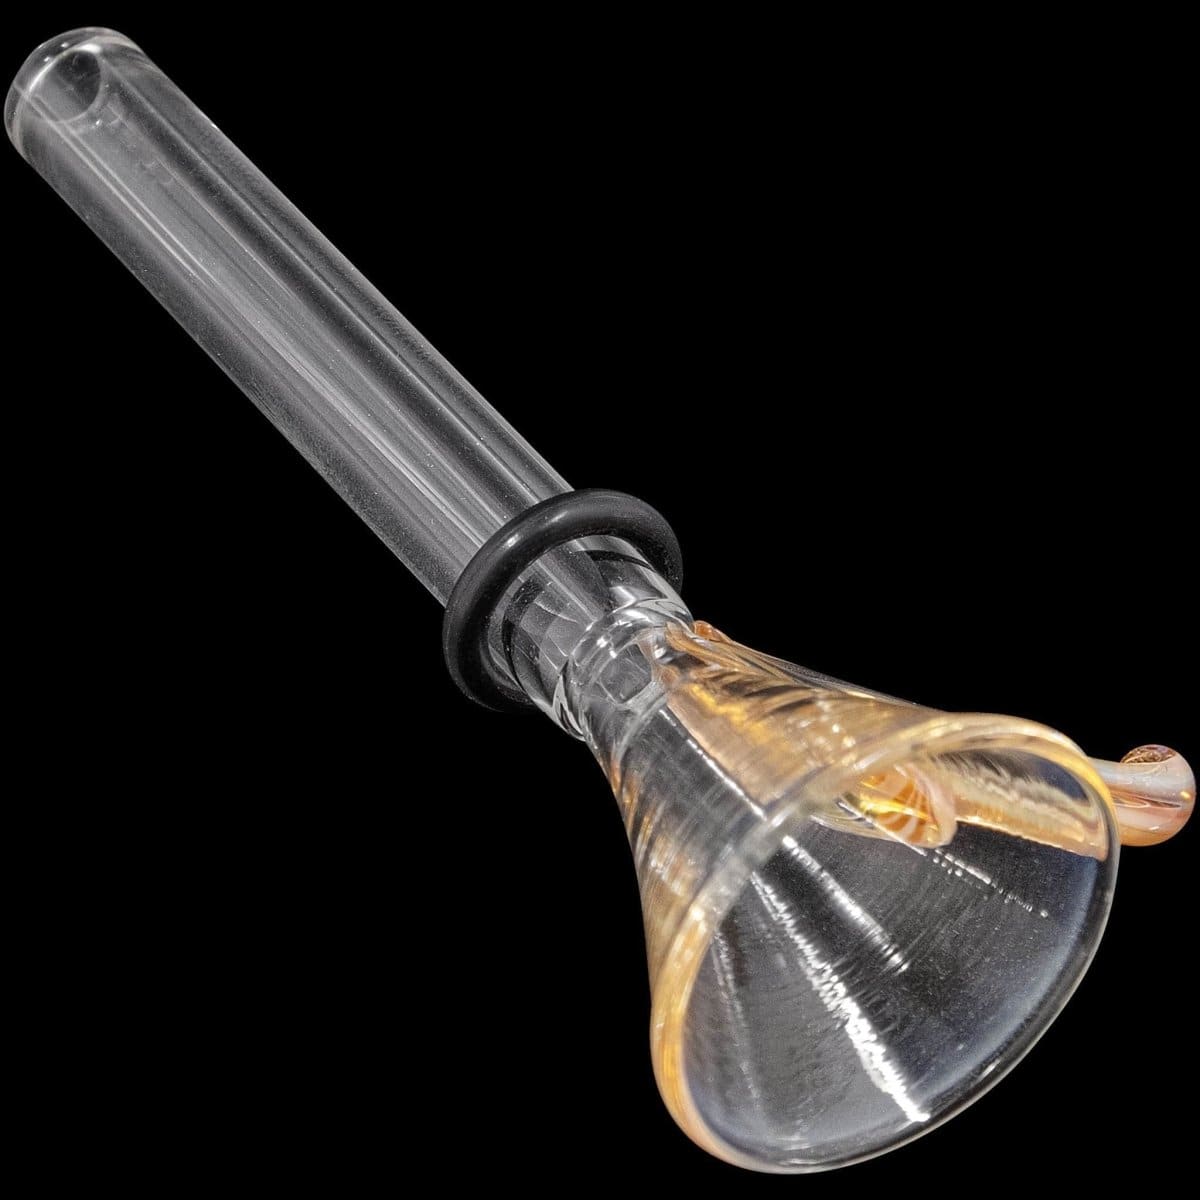 LA Pipes Smoking Accessory 9mm Funnel Slide Bowl with Handle for Pull-Stem Bongs